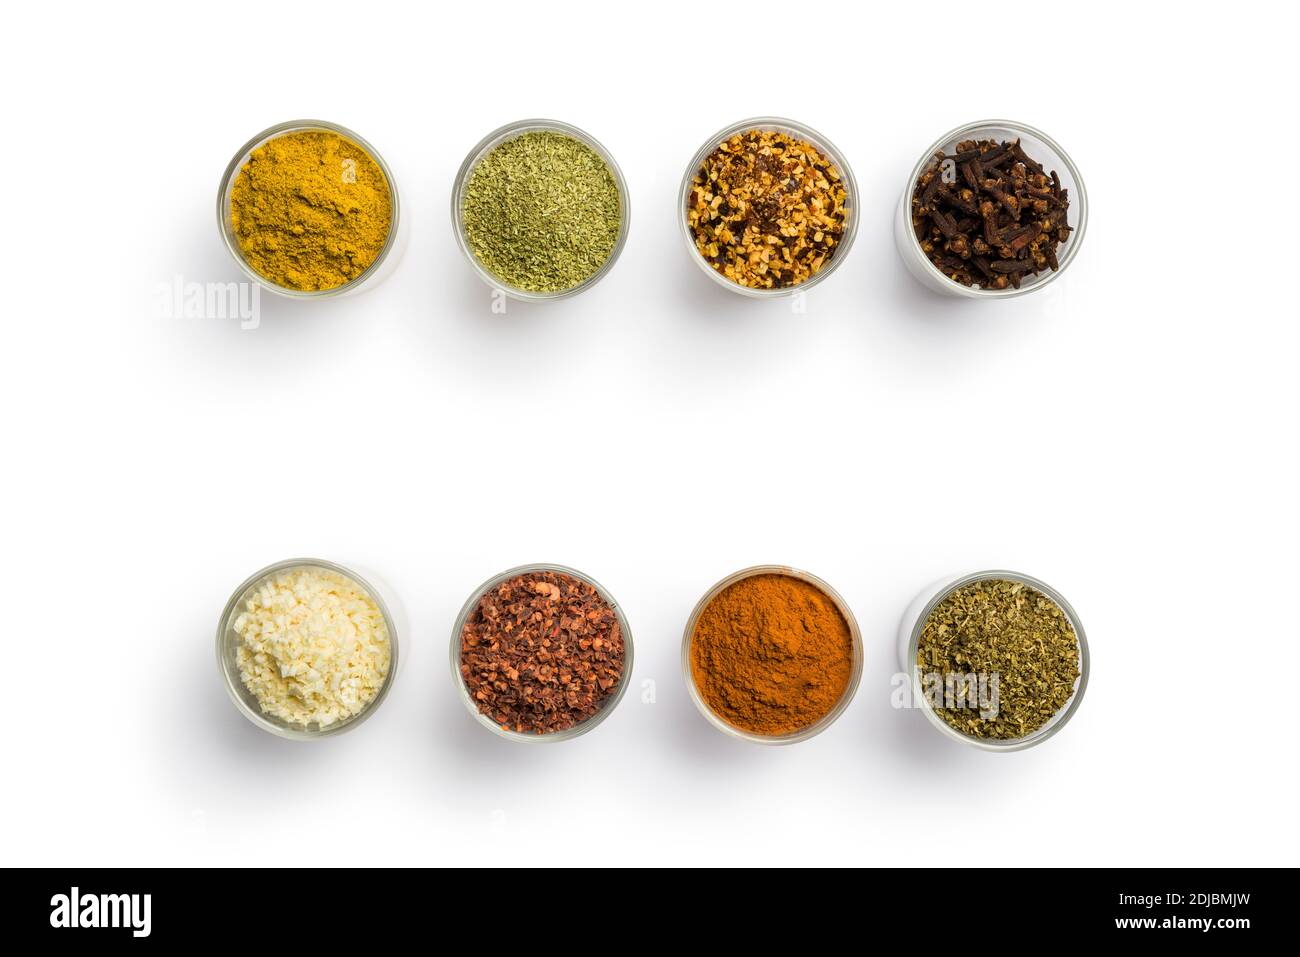 top view of glass jars with various spices on white background Stock Photo